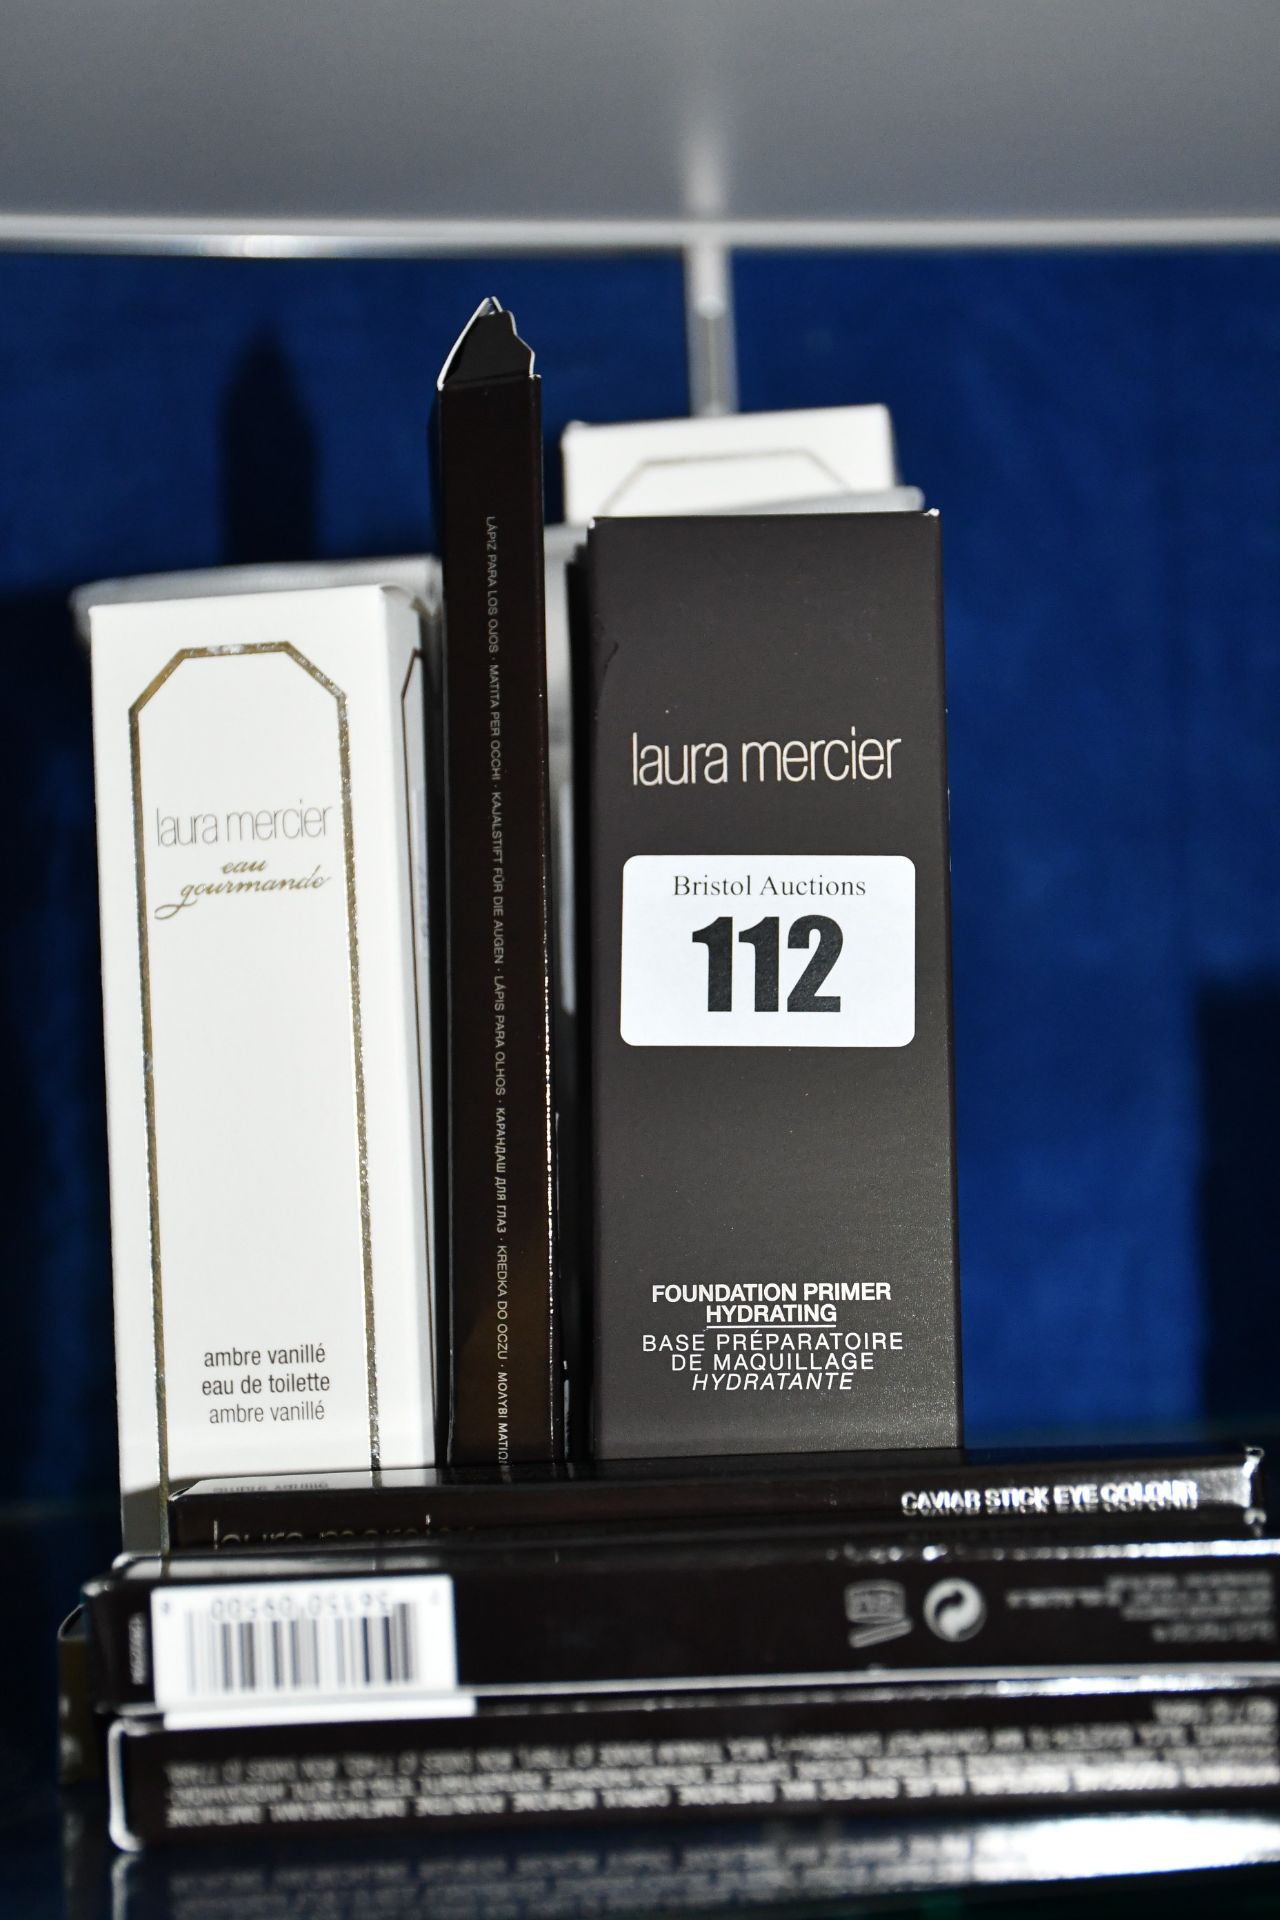 A quantity of Laura Mercier cosmetics to include foundation, crème body wash and long lash